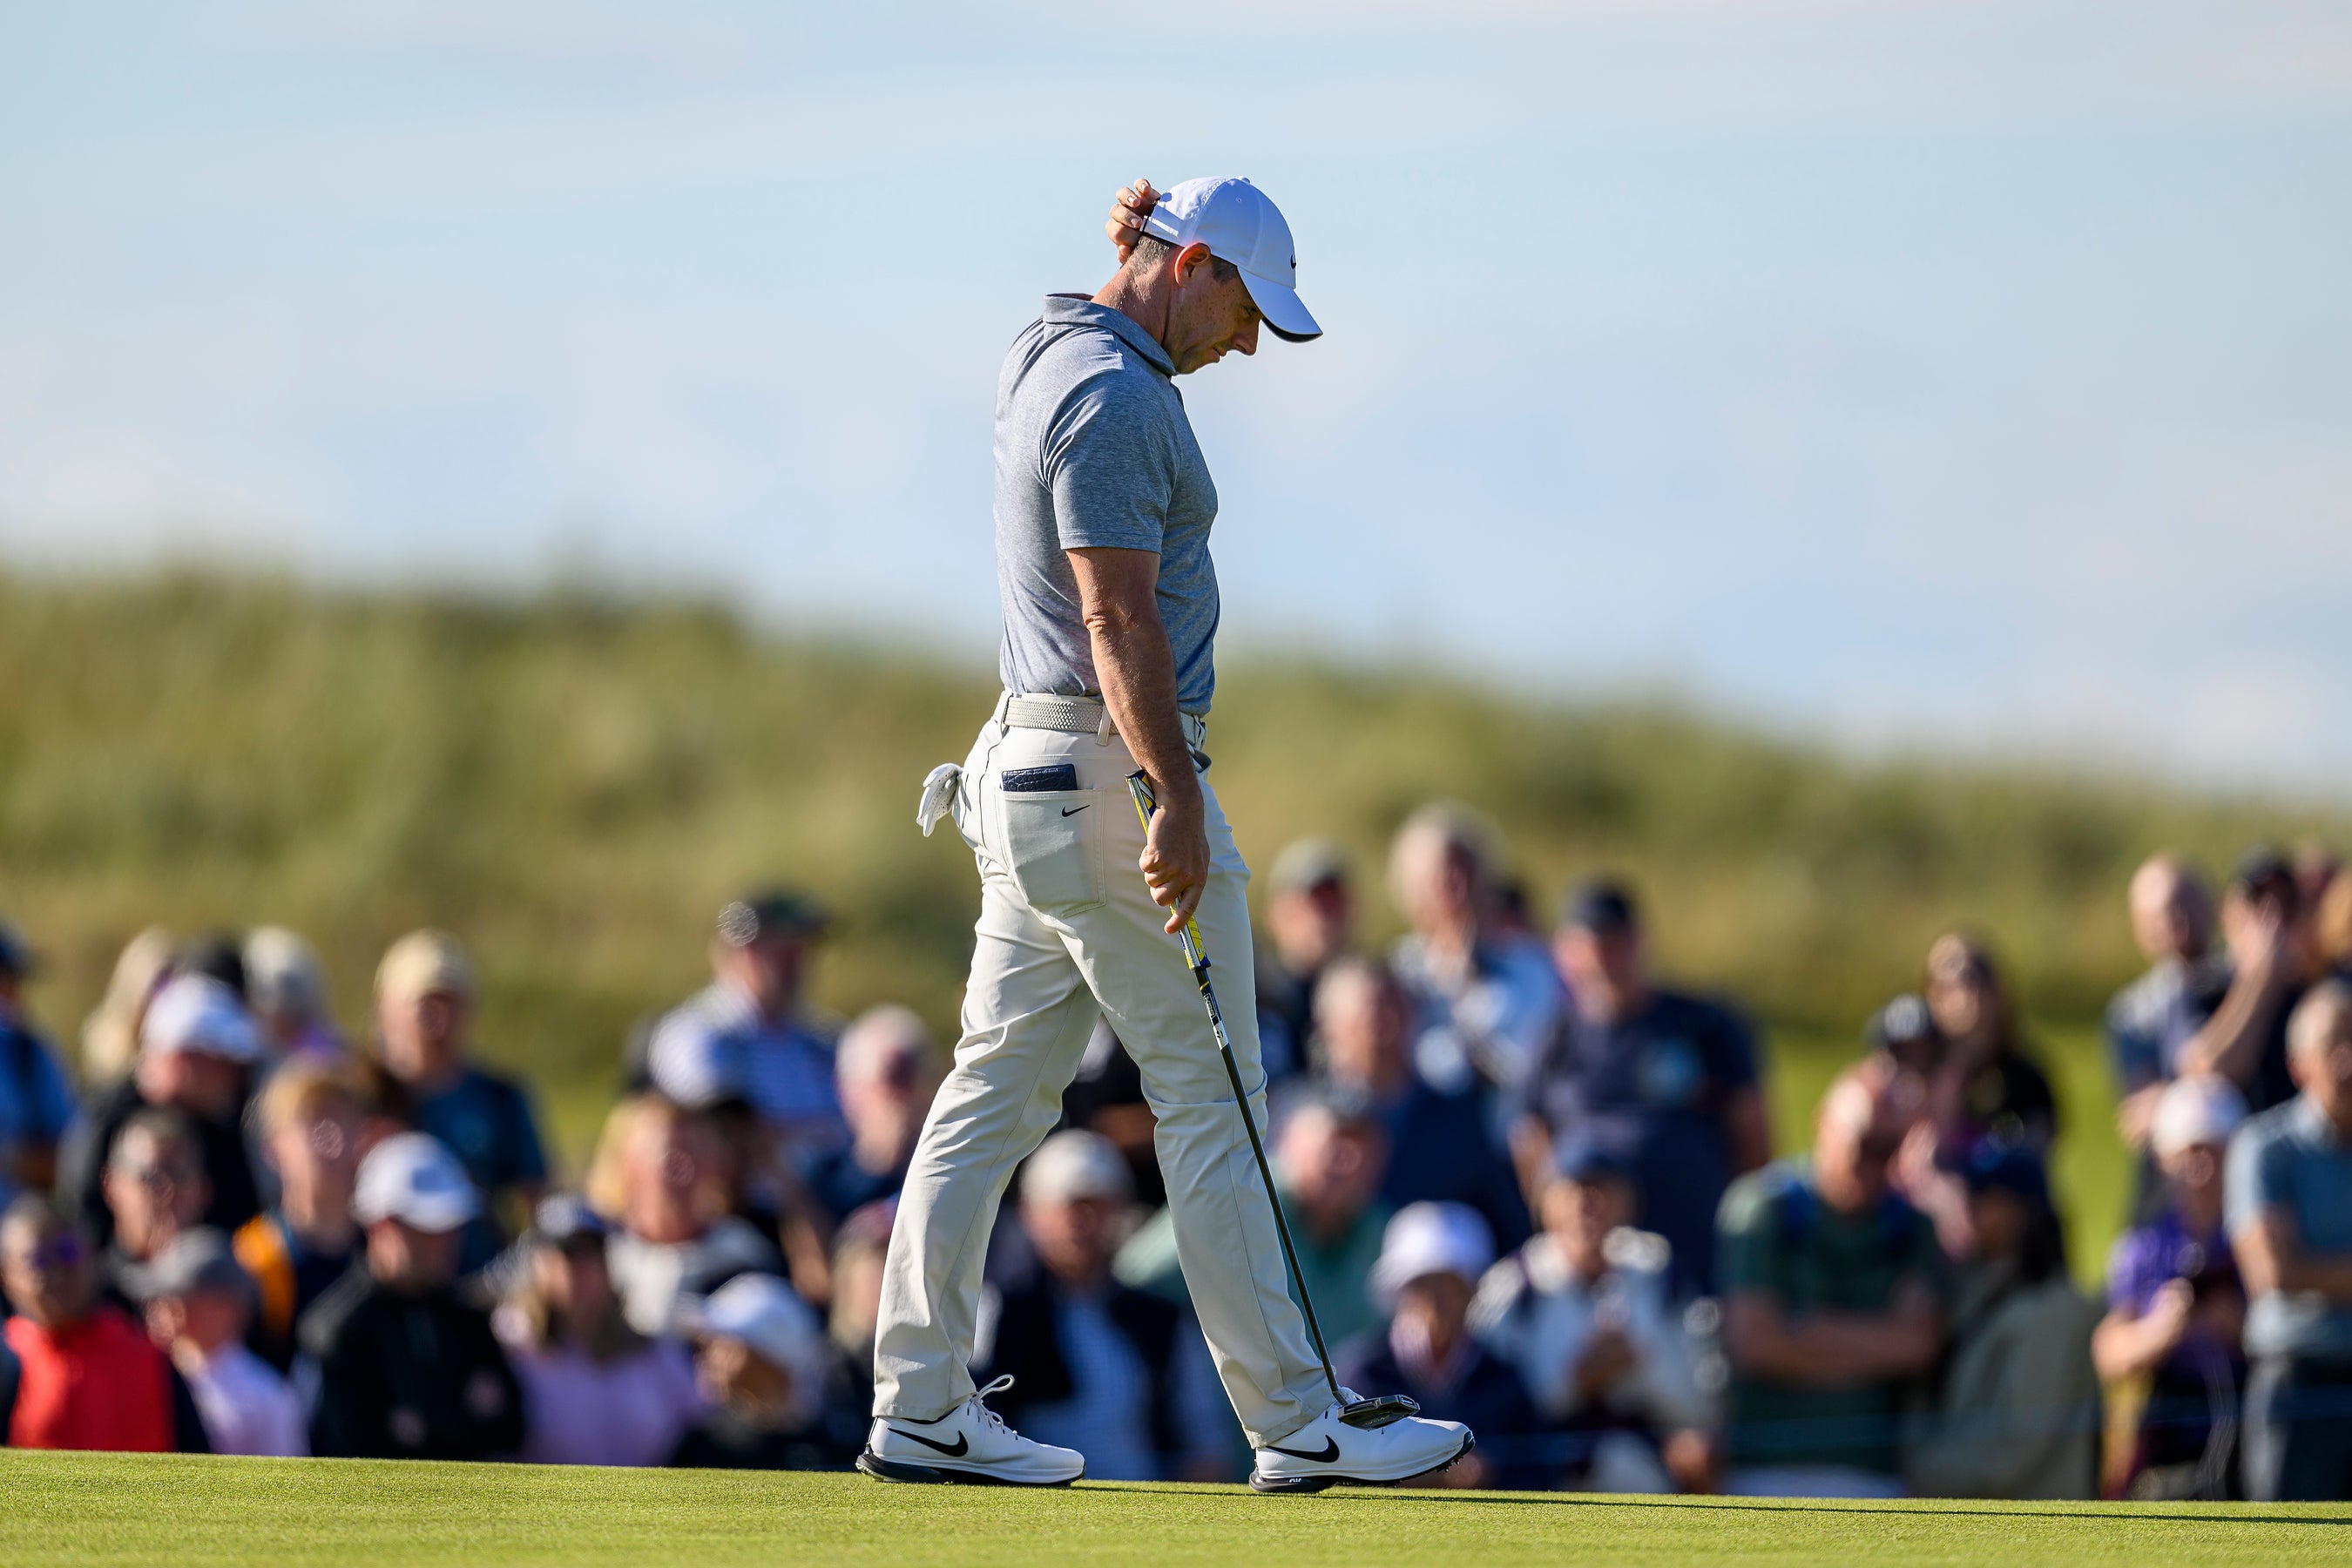 Rory McIlroy looked dejected after missing his birdie putt on the 16th hole in round two of the Scottish Open (Malcolm Mackenzie/PA)